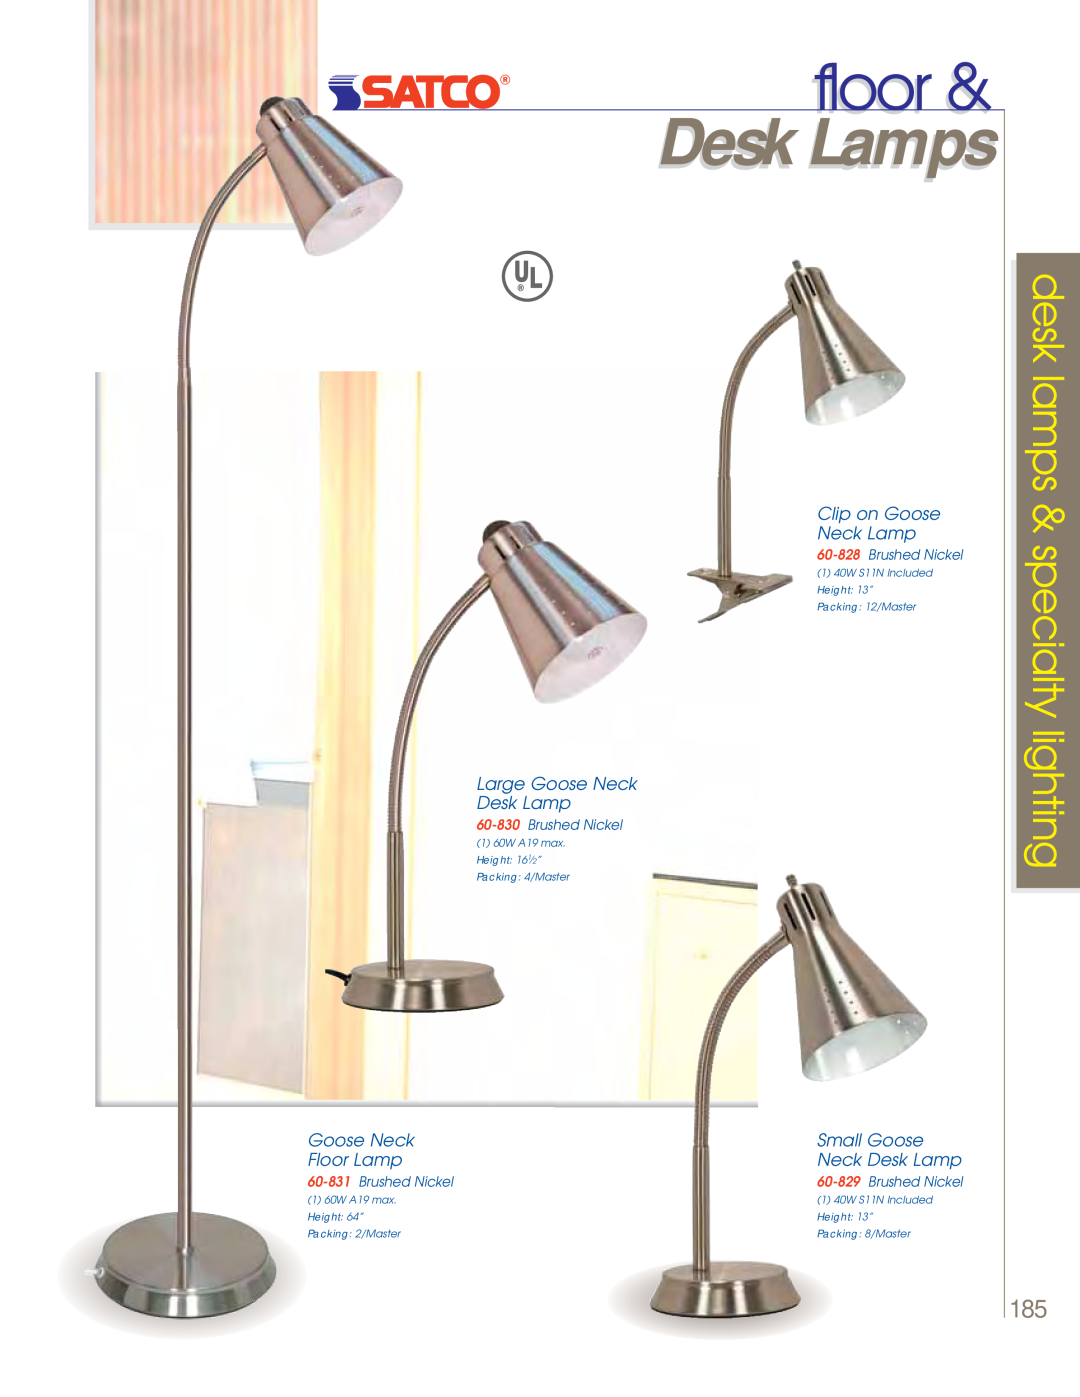 Satco Products 60-801 Desk Lamps, floor, desk lamps & specialty lighting, Clip on Goose Neck Lamp, Small Goose, Floor Lamp 